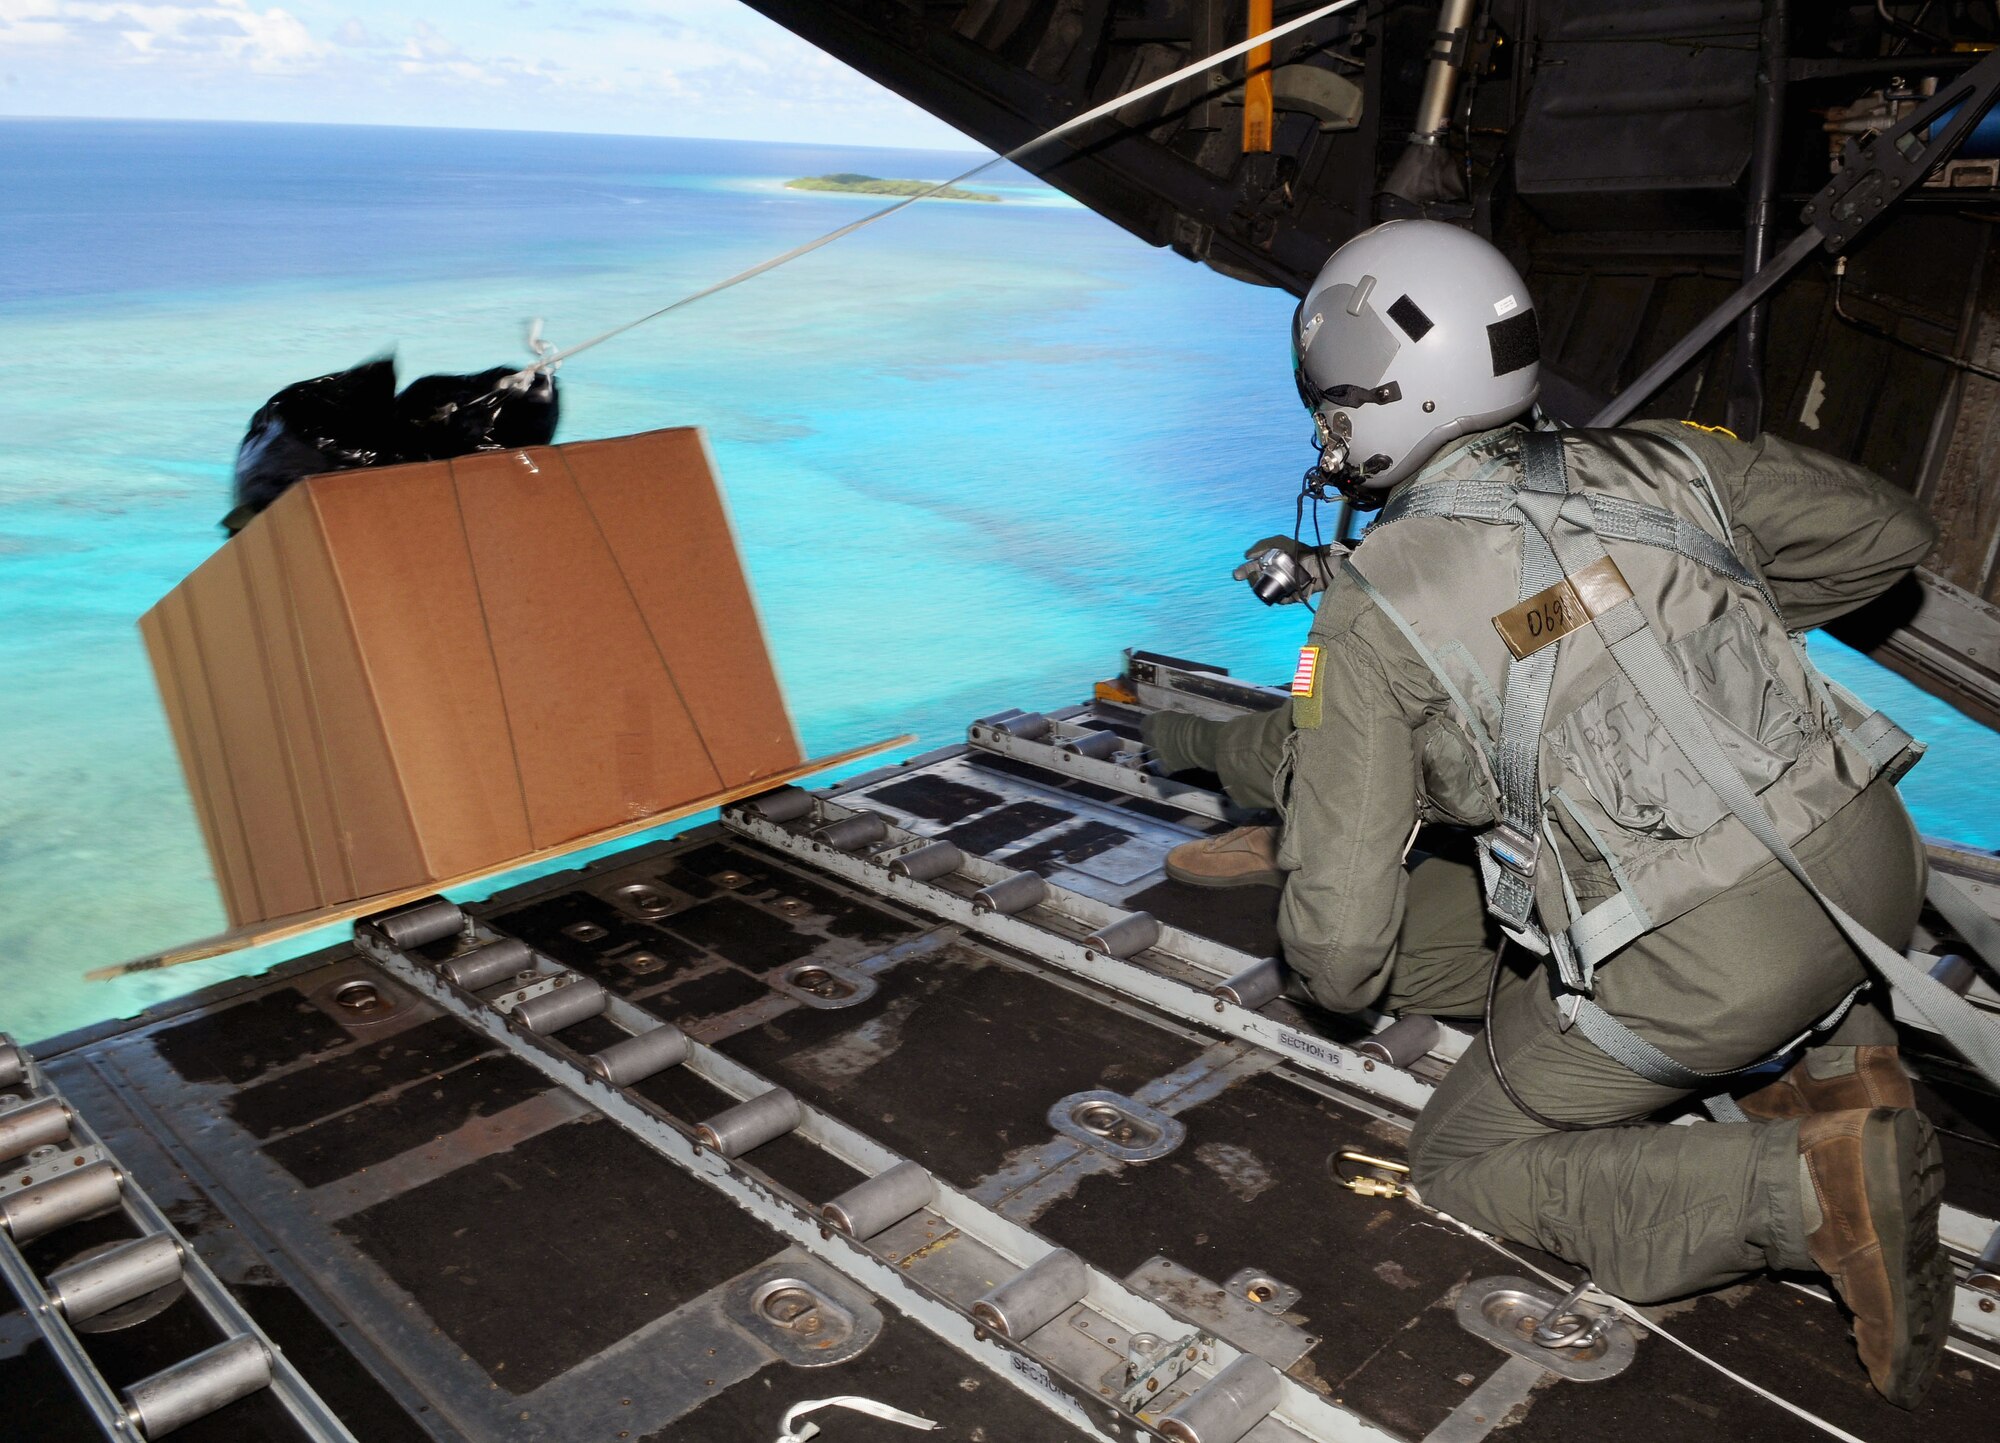 Senior Airman Joseph Doria and Capt. Stanley Kimball watch after pushing a box of humanitarian assistance goods out of a U.S. Air Force C-130 Hercules, call sign "Santa 23" to its drop-zone in Yap Islands during Operation Christmas Drop, Dec. 14, 2010. This year more than 60 boxes will be dropped to 55 Island weighing in at more than 20,000 pounds.Airman Doria is a 36th Airlift Squadron loadmaster from Yokota Air Base, Japan. Captain Kimball is the 36th Airlift Squadron flight surgeon. (U.S. Air Force photo/Senior Airman Nichelle Anderson)
